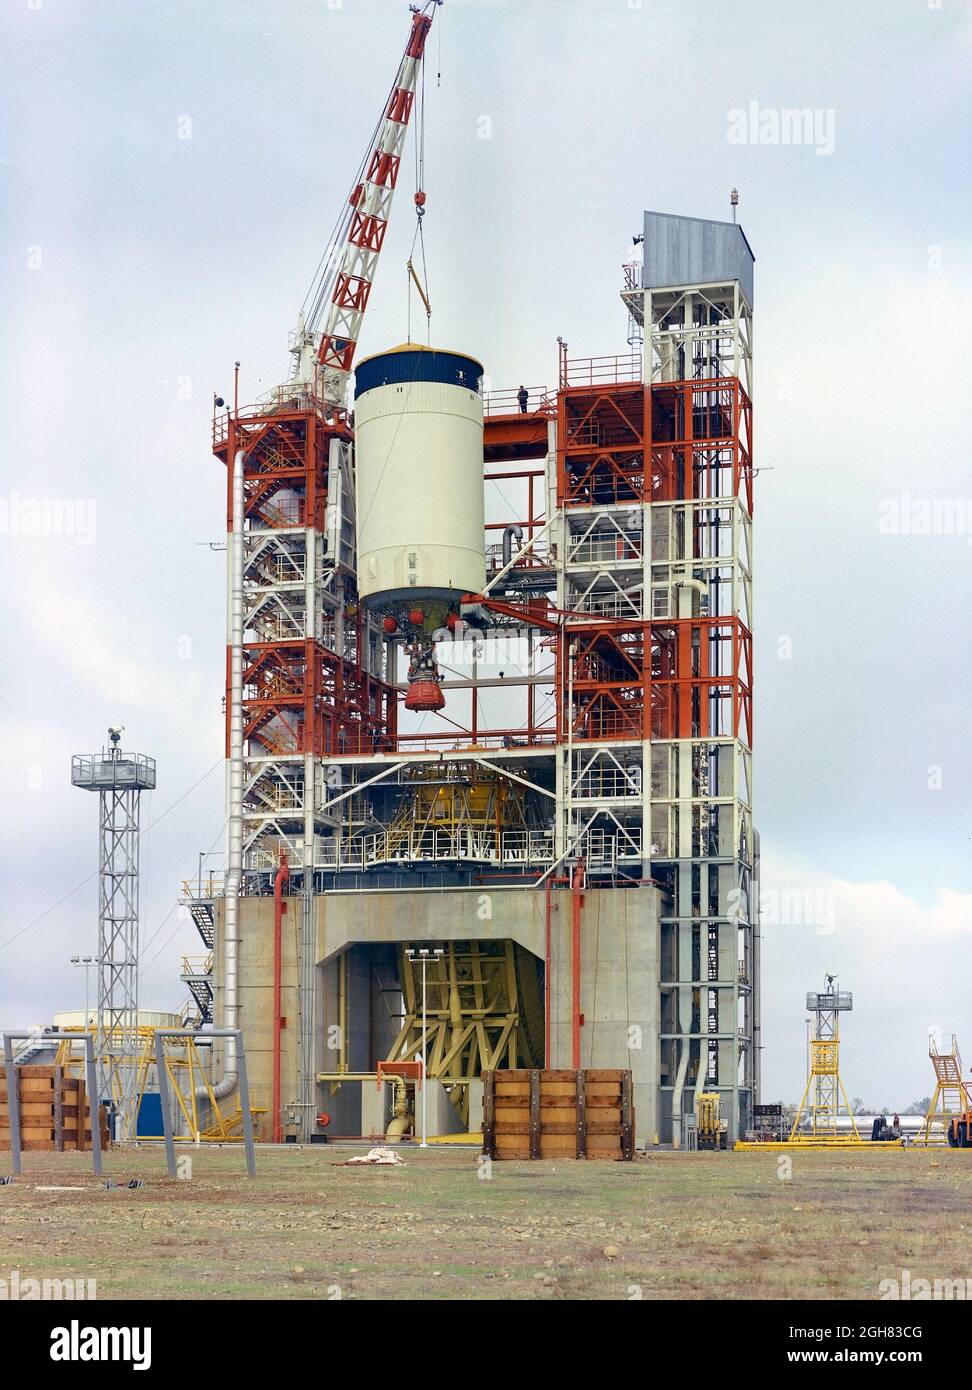 This image depicts the Saturn V S-IVB (third) stage for the Apollo 10 mission being removed from the Beta Test Stand 1 after its acceptance test at the Douglas Aircraft Company's Sacramento Test Operations (SACTO) facility. After the S-II (second) stage dropped away, the S-IVB (third) stage was ignited and burned for about two minutes to place itself and the Apollo spacecraft into the desired Earth orbit. At the proper time during this Earth parking orbit, the S-IVB stage was re-ignited to speed the Apollo spacecraft to escape velocity injecting it and the astronauts into a moon trajectory. De Stock Photo